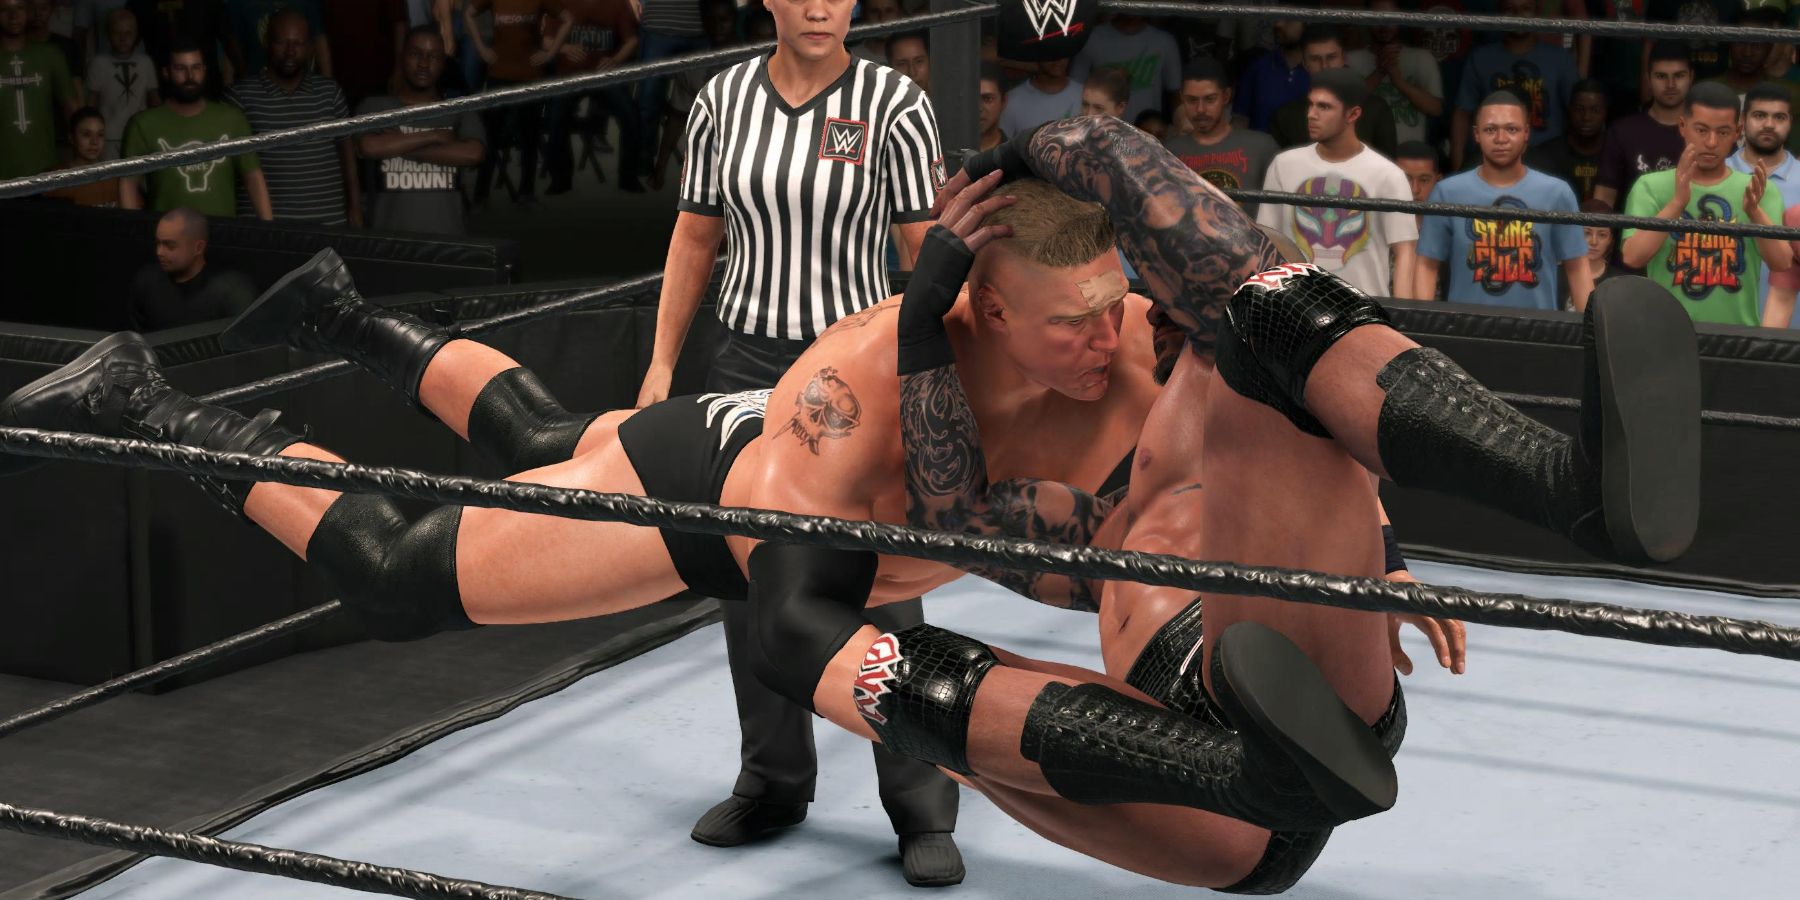 WWE 2k23 Randy Orton with the rebound catch finisher on Brock Lesnar